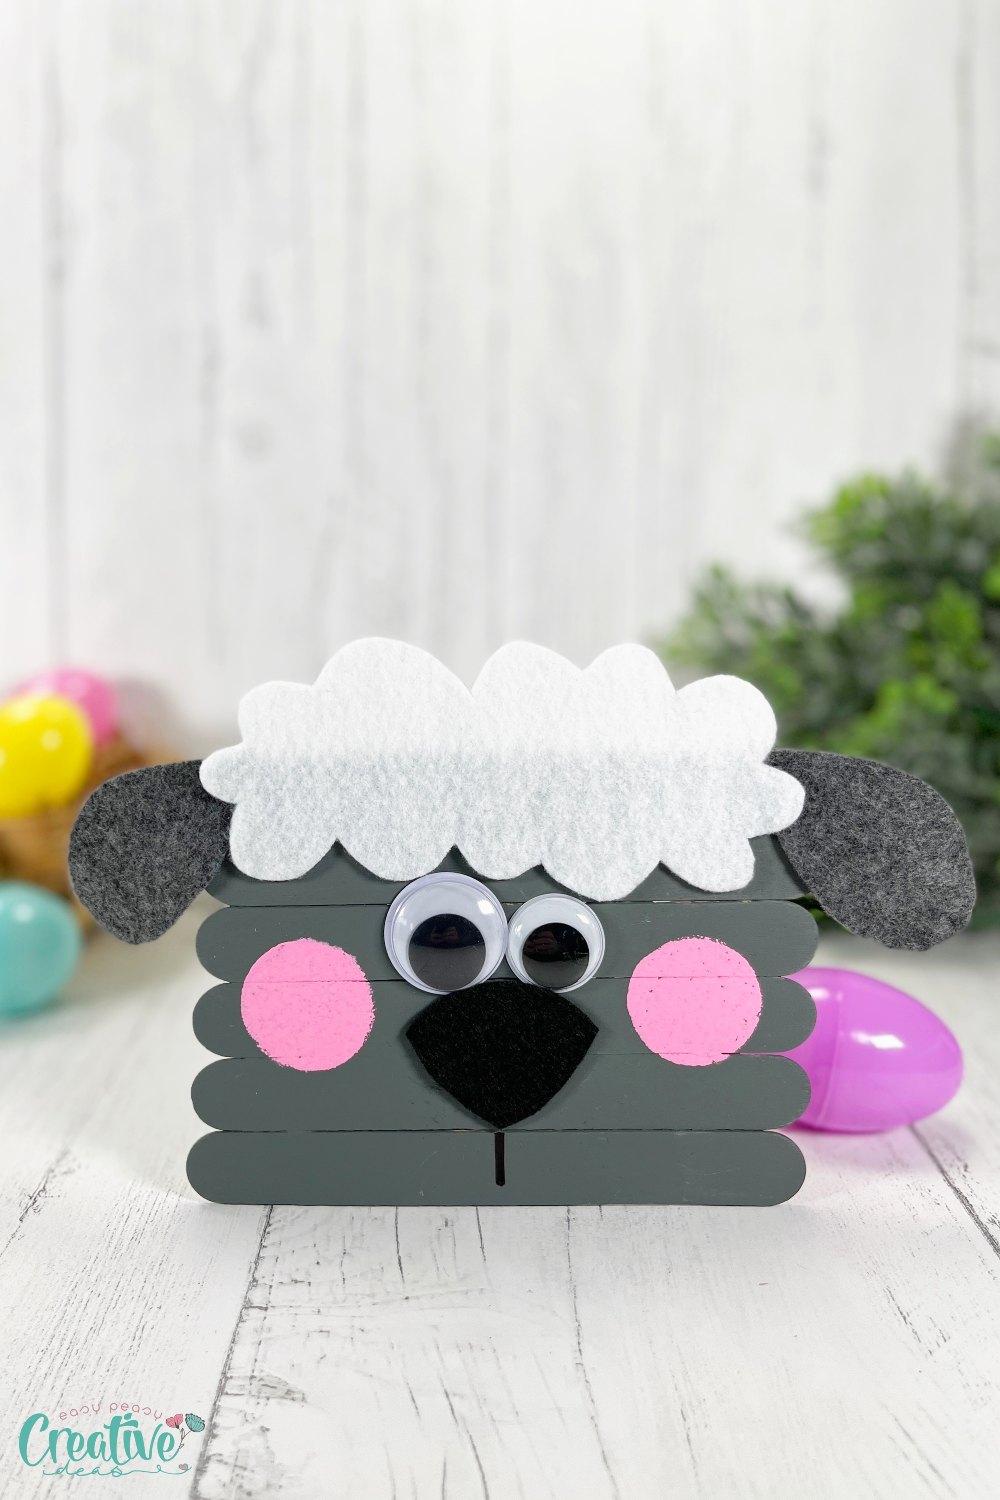 Sheep Painted Rocks - Crafts by Amanda - Easter Crafts